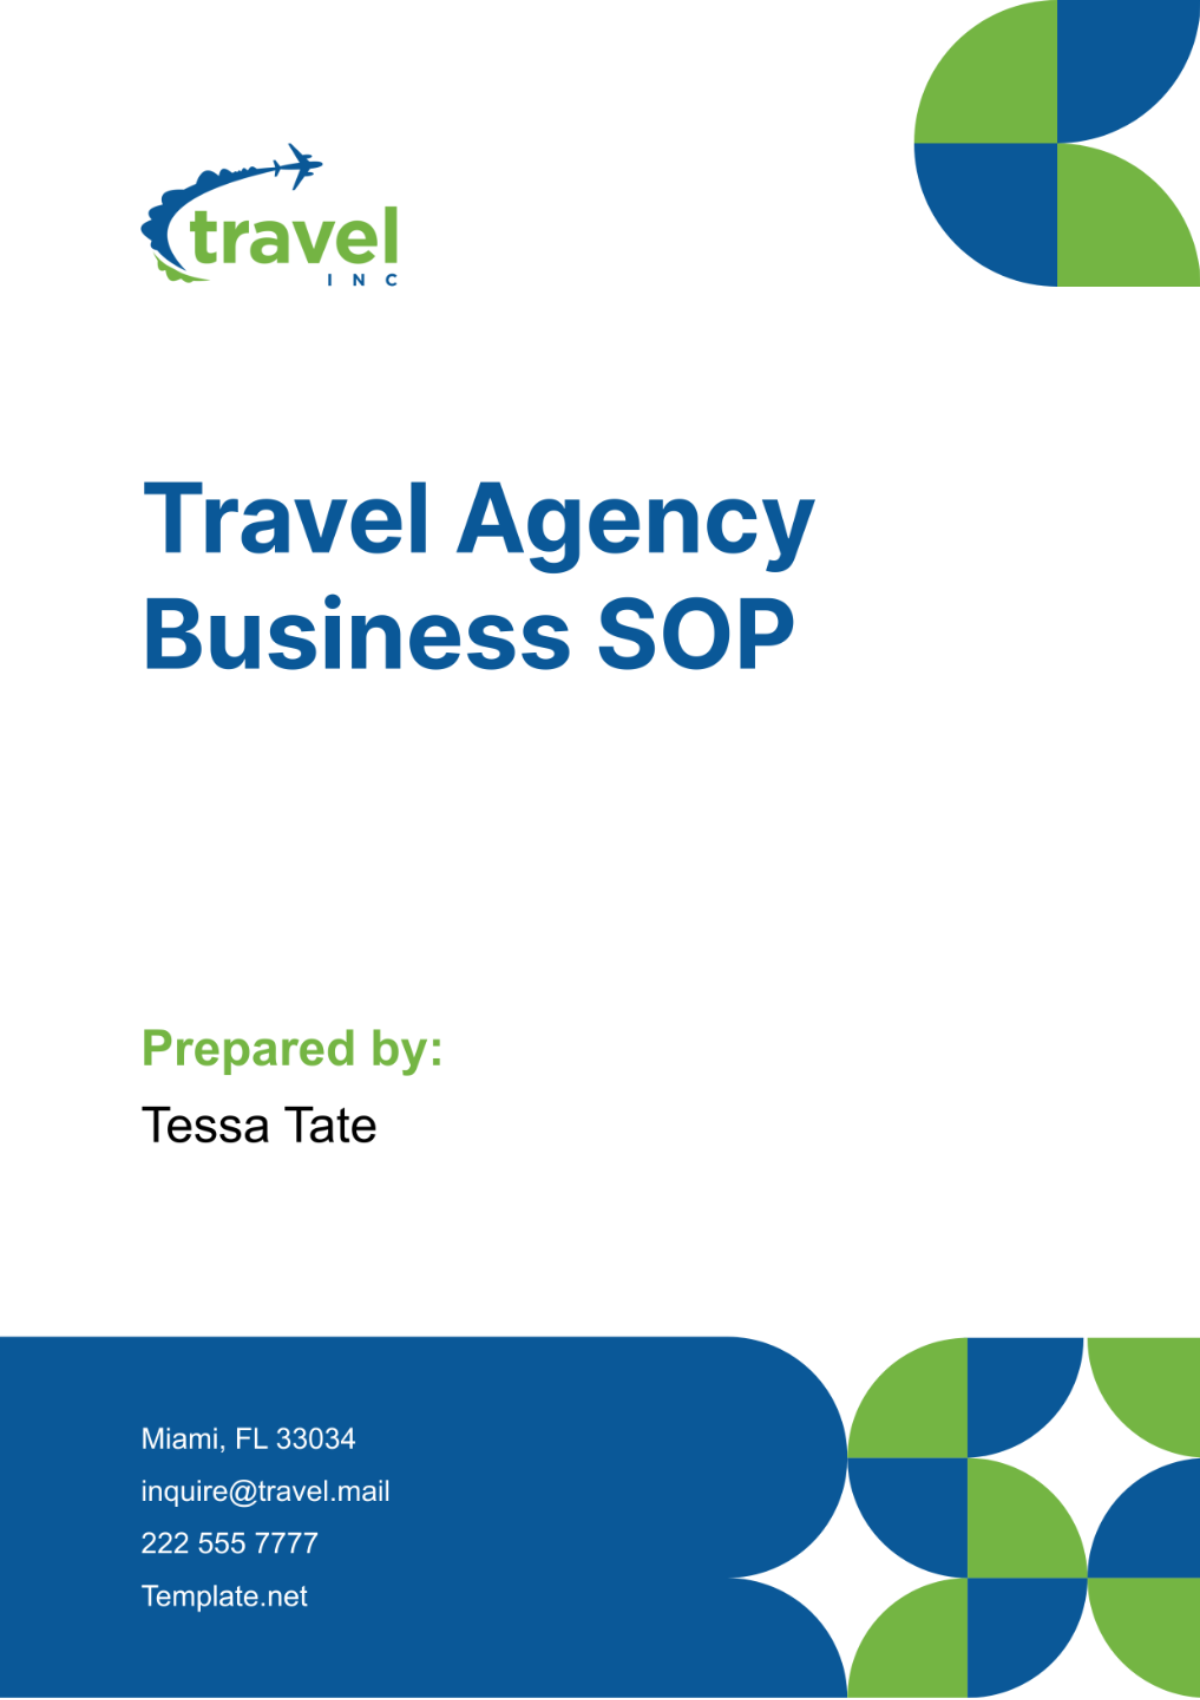 Travel Agency Business SOP Template